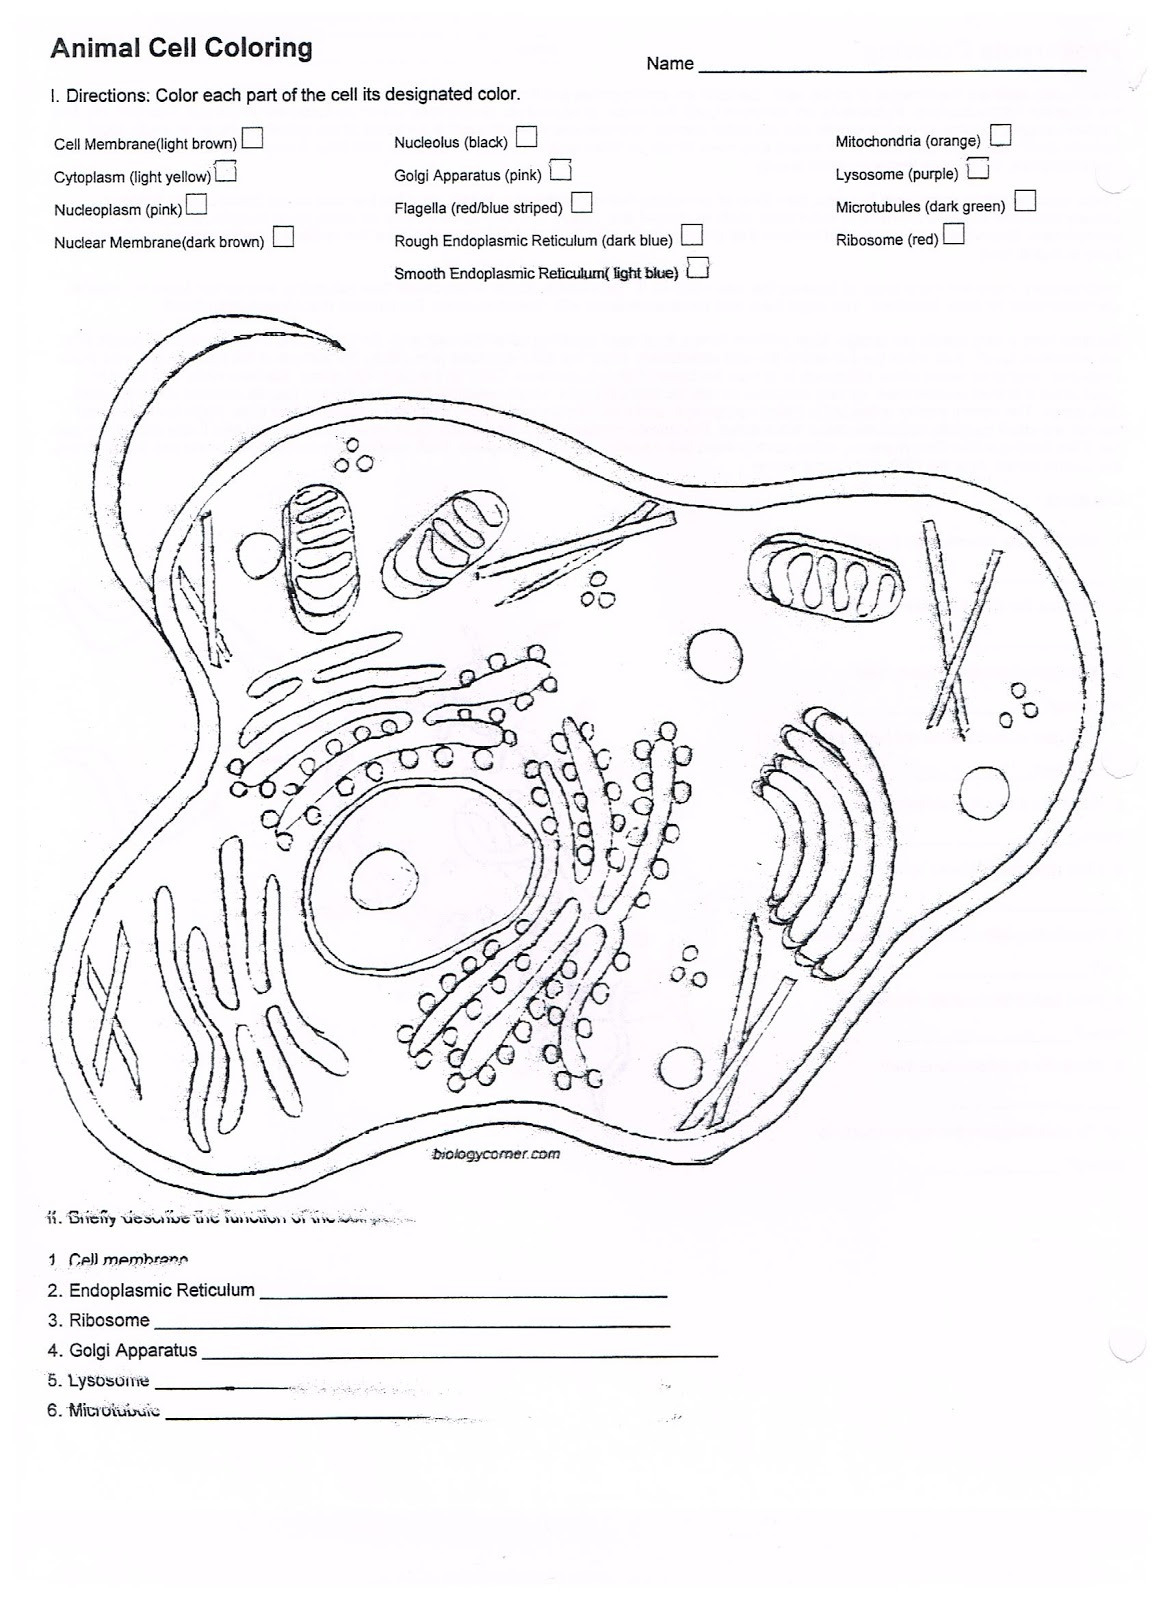 Animal Cells Worksheet Answers